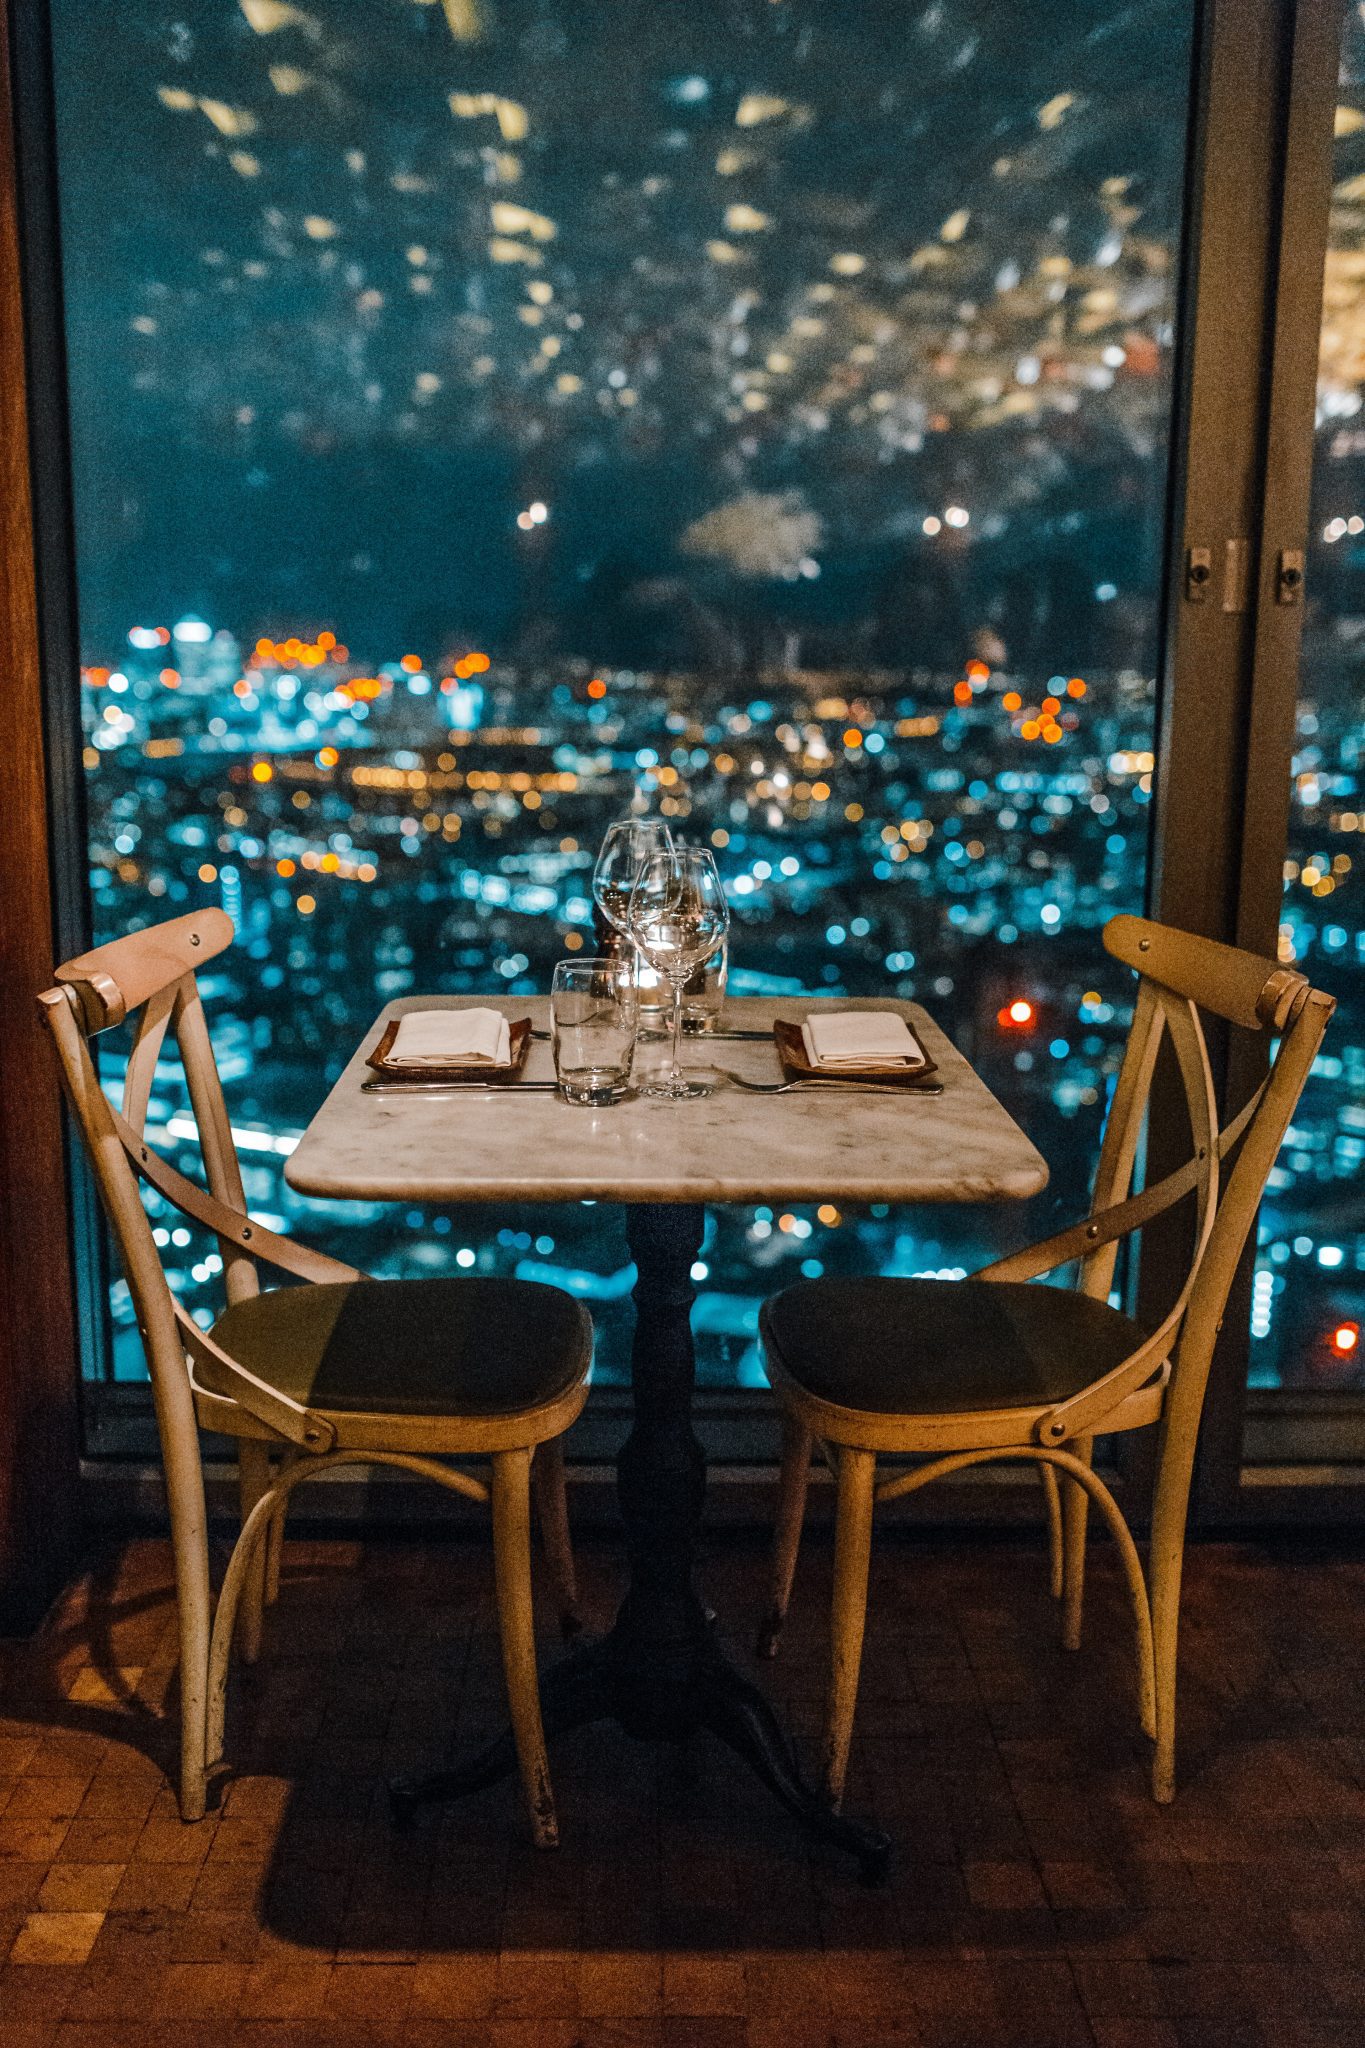 a table for two set by a window overlooking a city for a special date night out